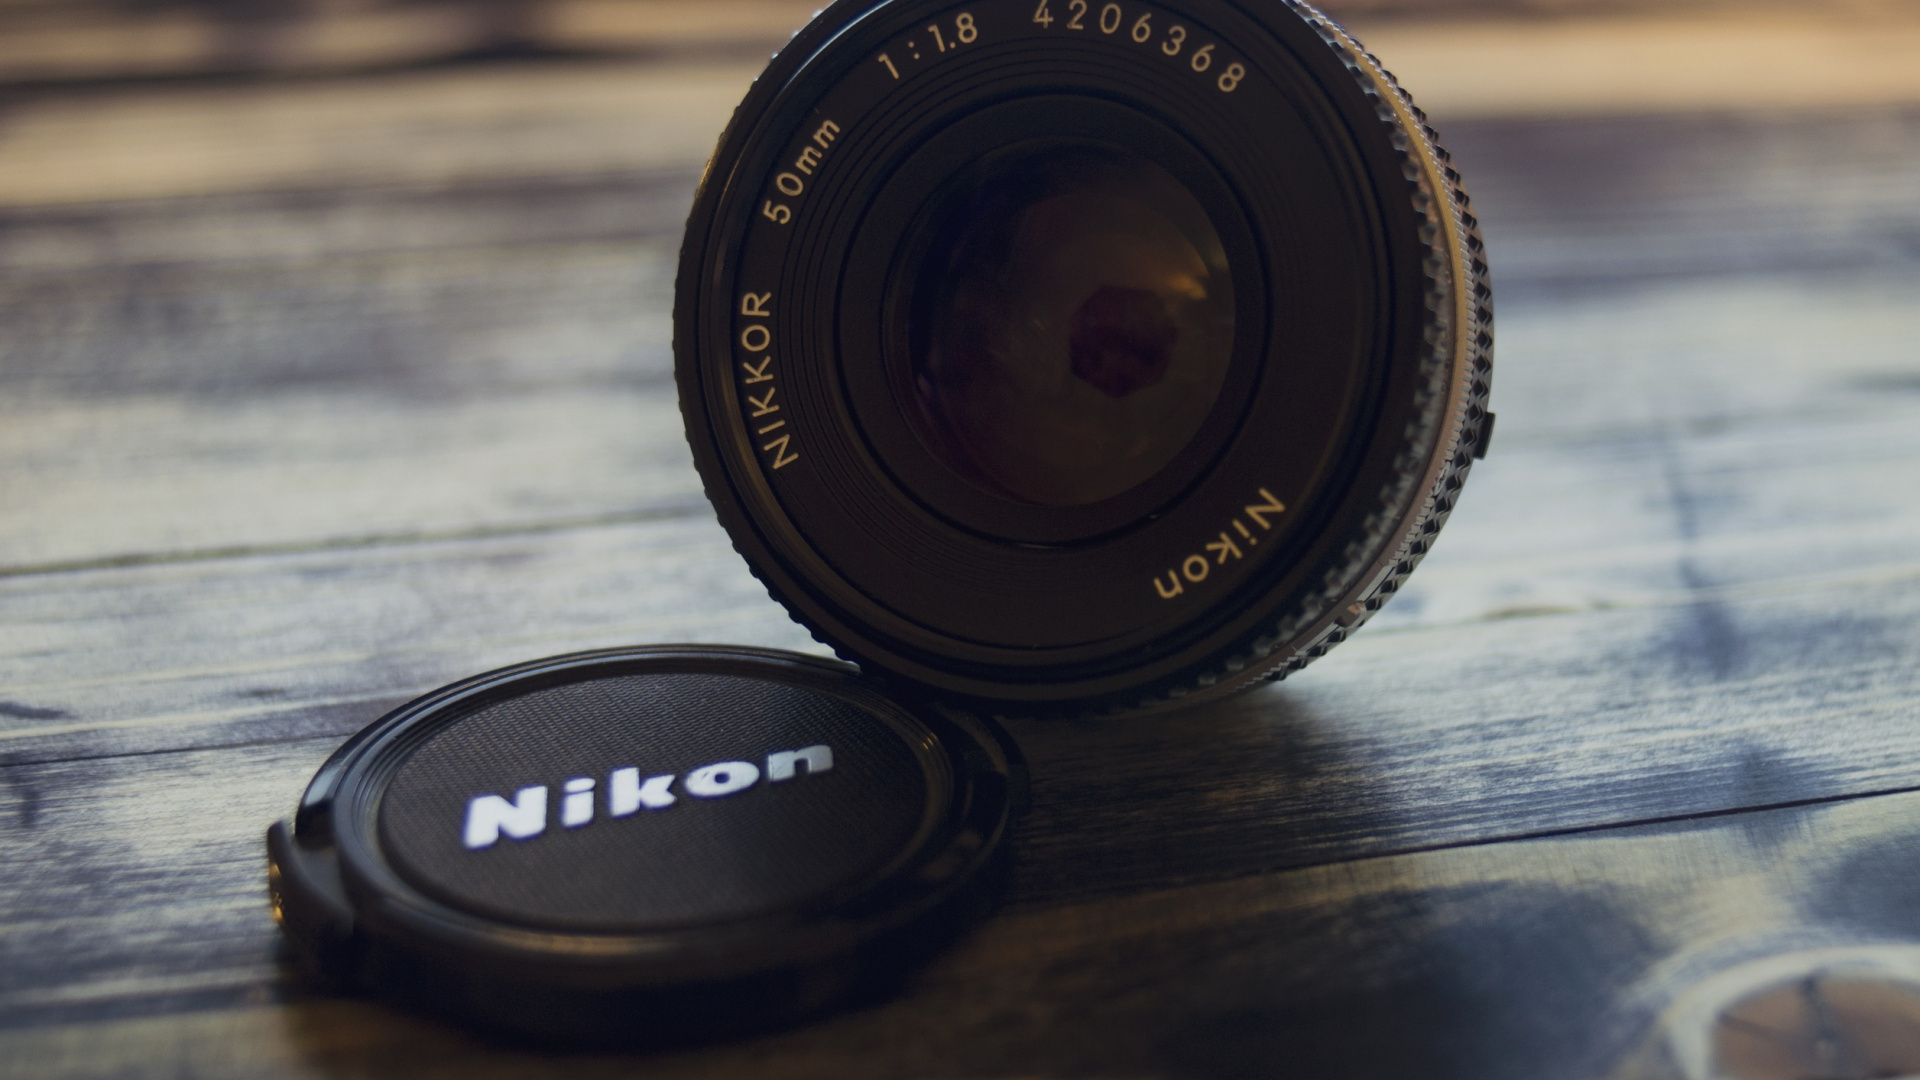 Black Nikon Camera Lens on Brown Wooden Table. Wallpaper in 1920x1080 Resolution